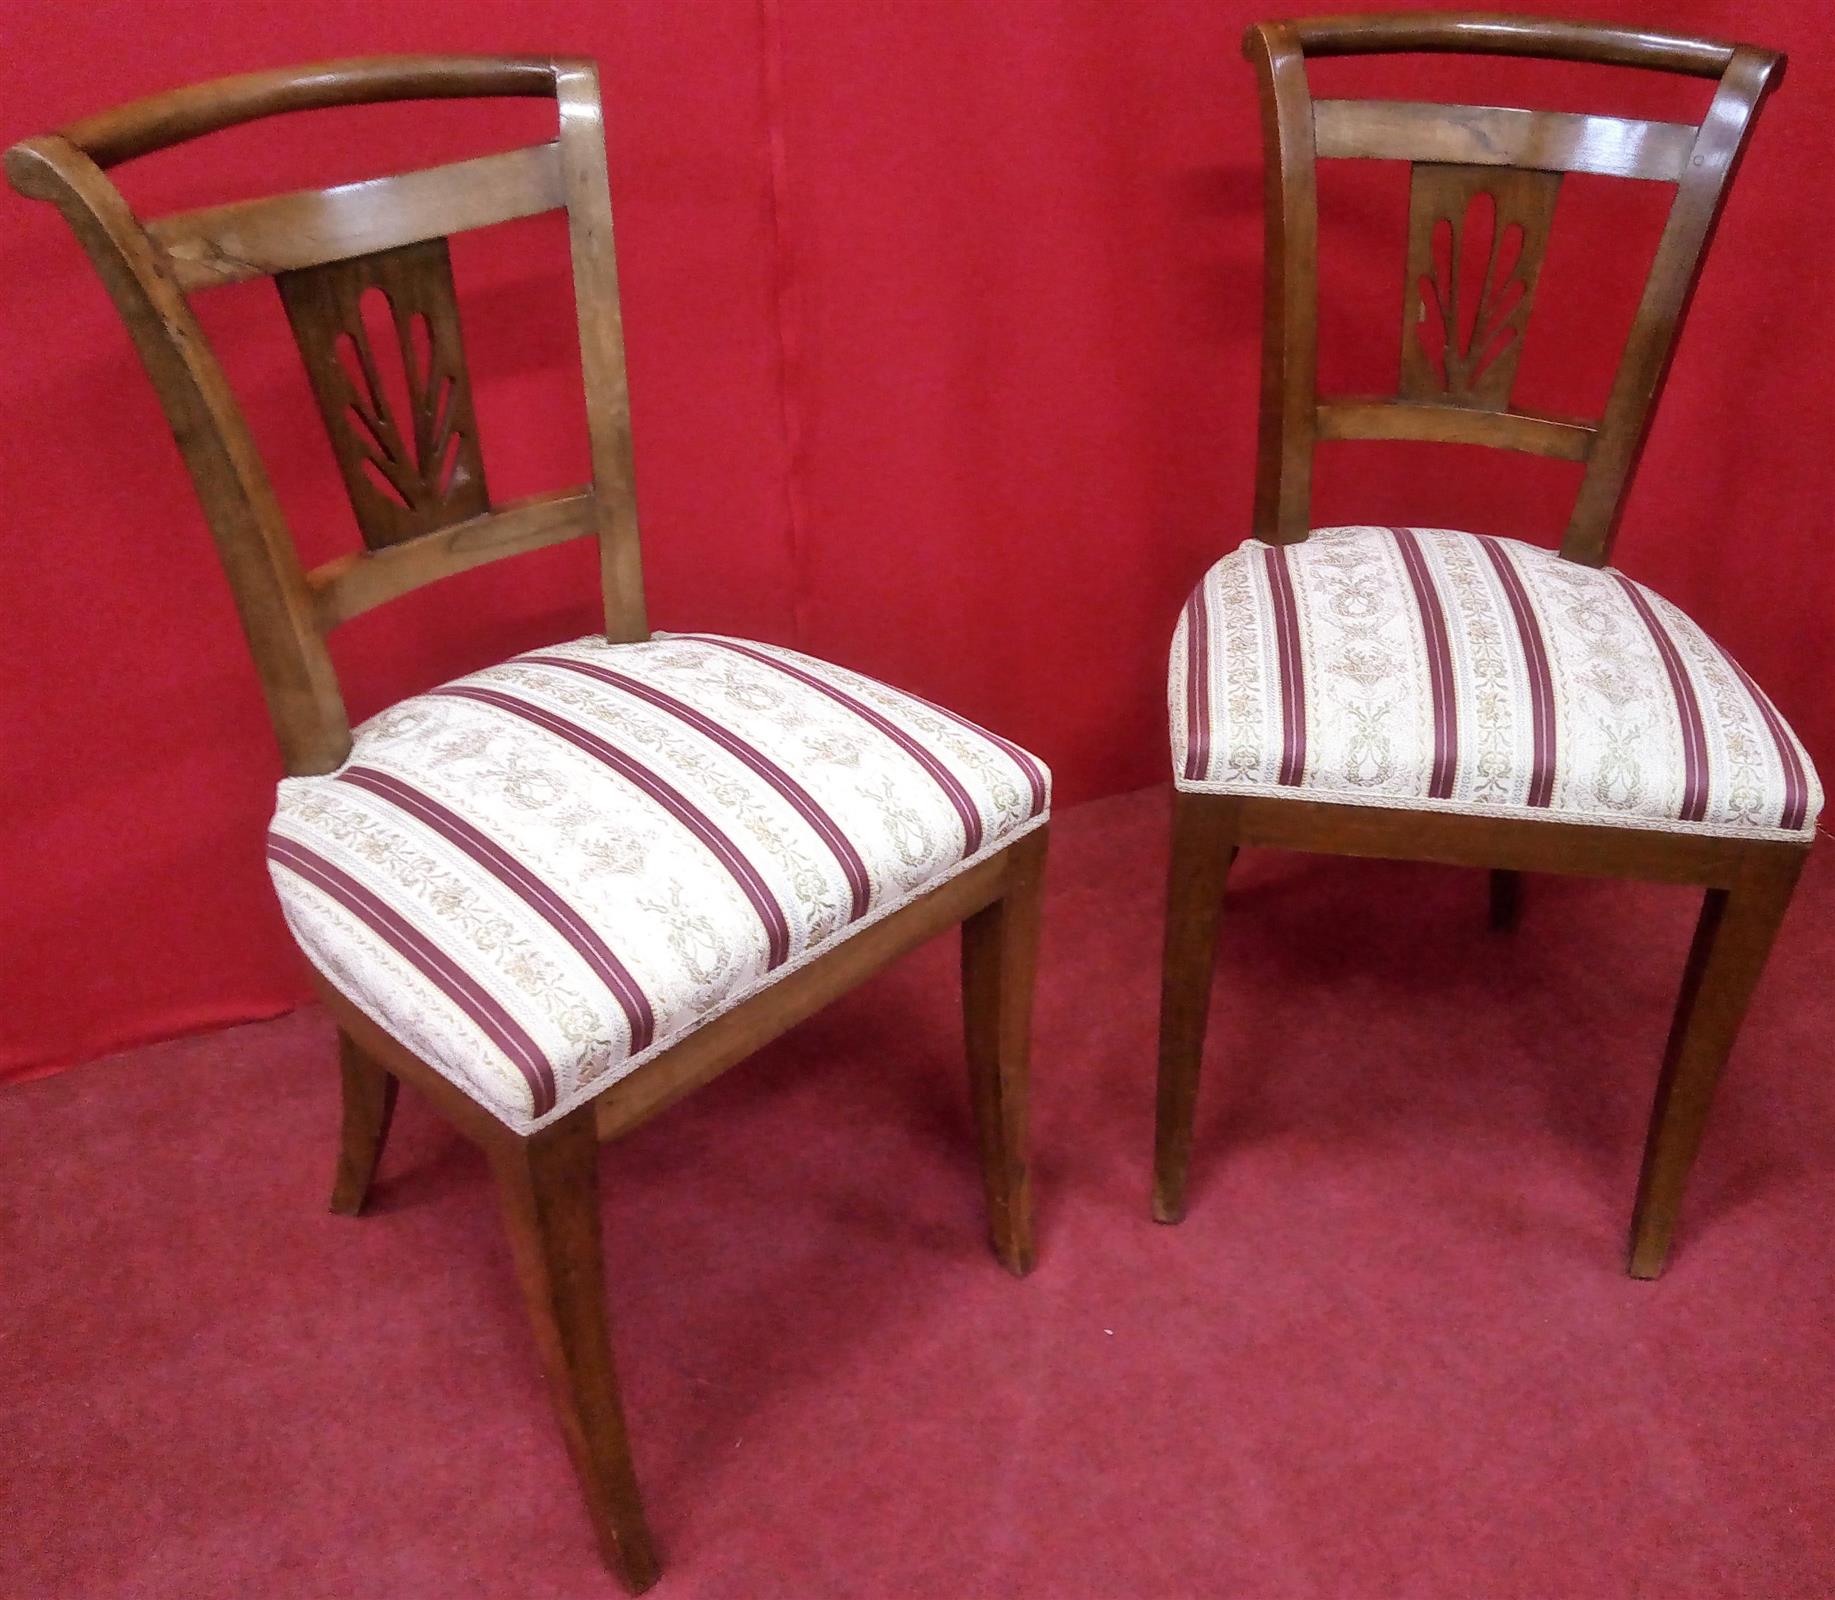 Pair of Carlo X chairs in walnut